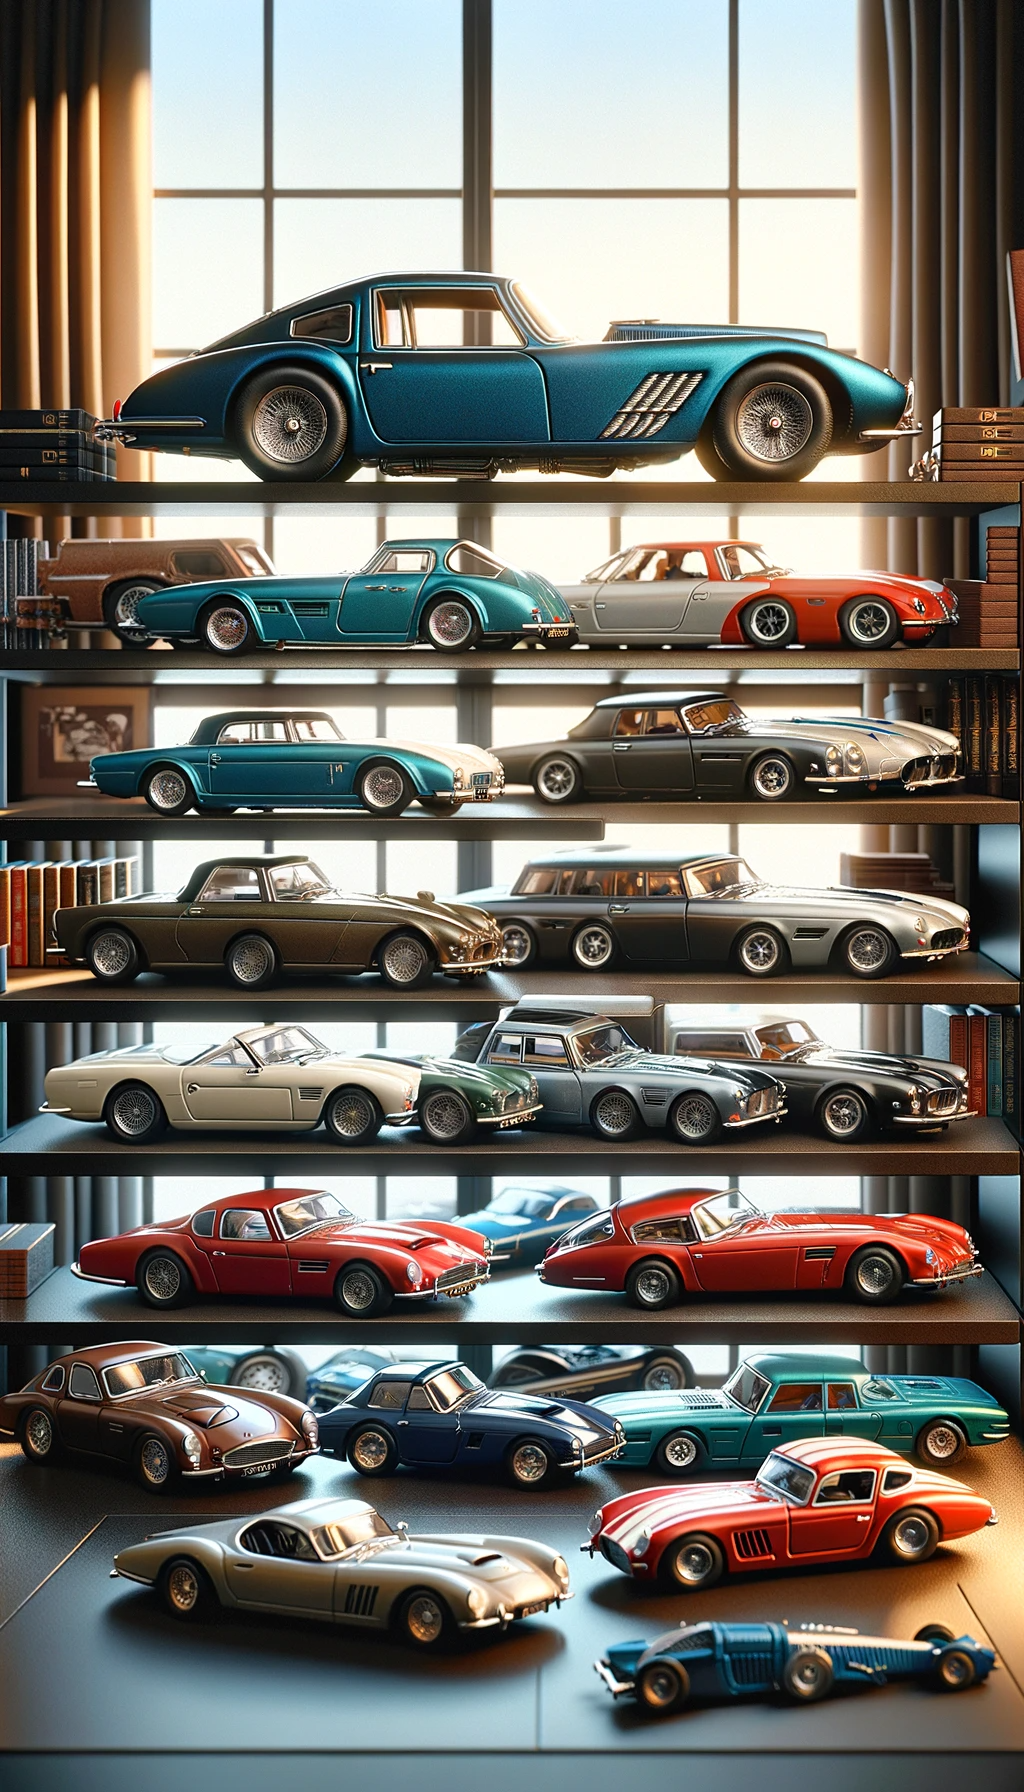 DALL·E 2023-11-23 17.06.32 - A vertical image showcasing a diverse and sophisticated diecast model car collection, suitable for a 500x1000 format. The collection features a range